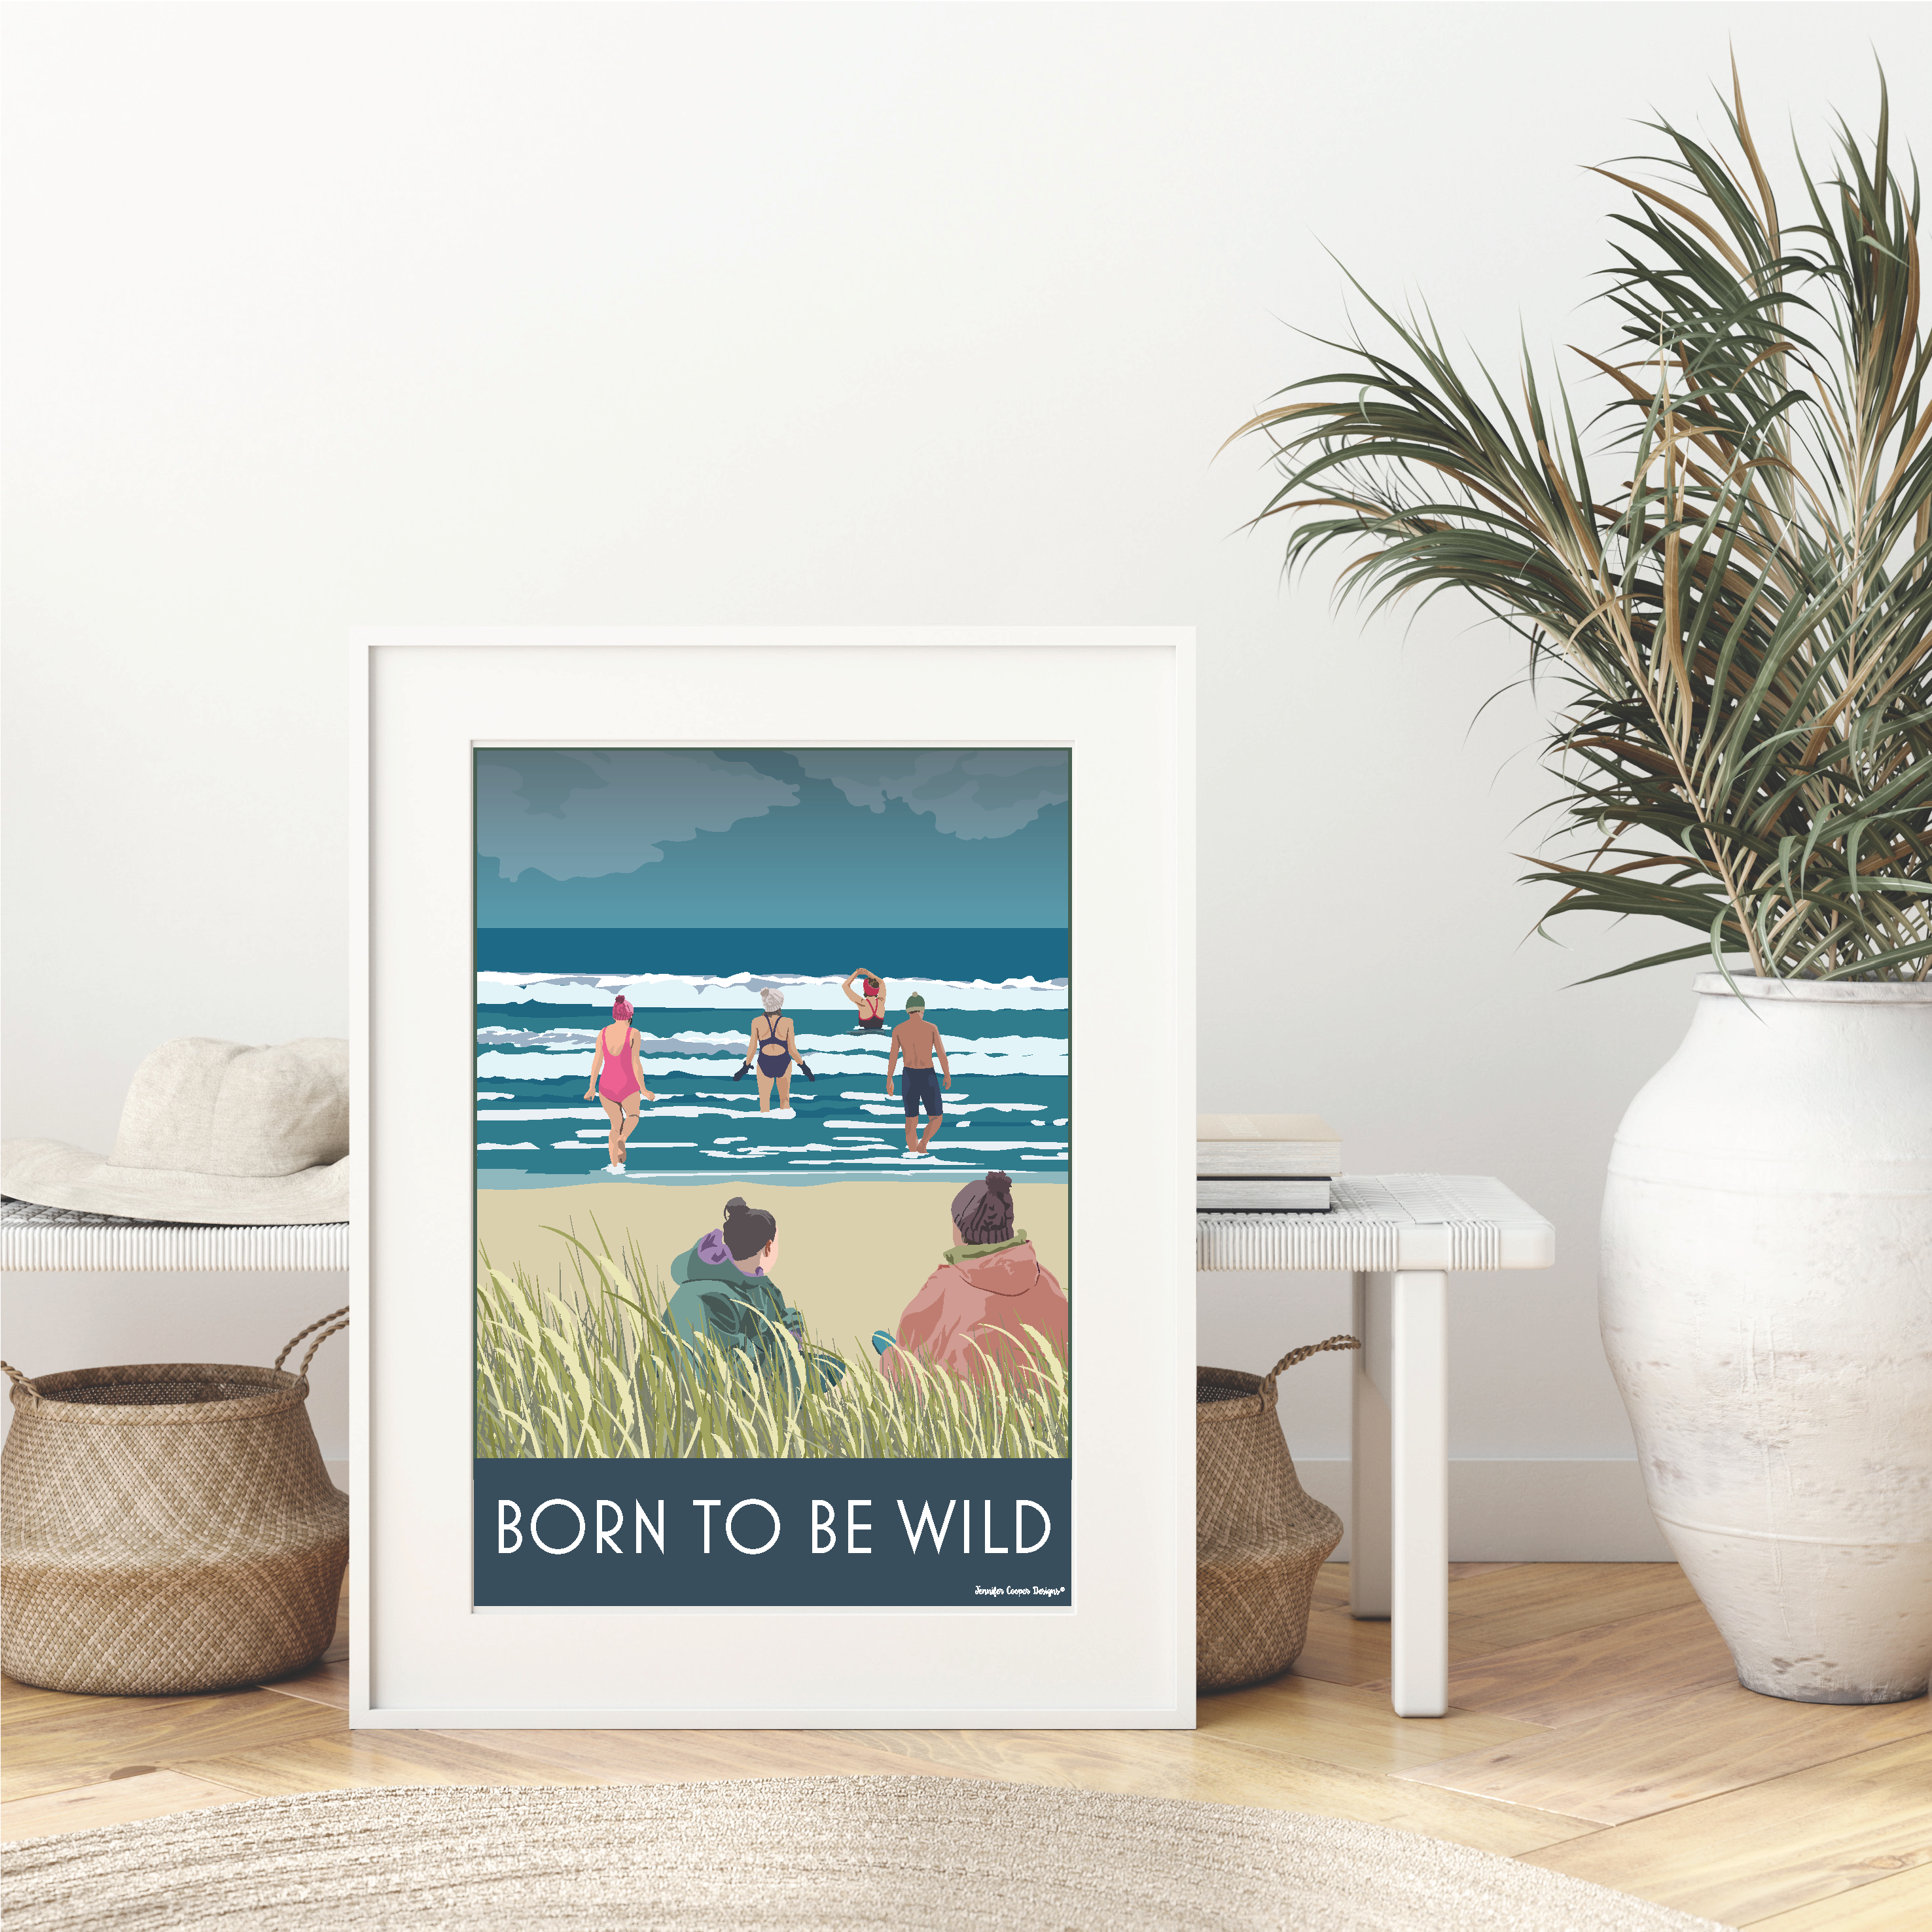 Born to be Wild - Sea Swimmers